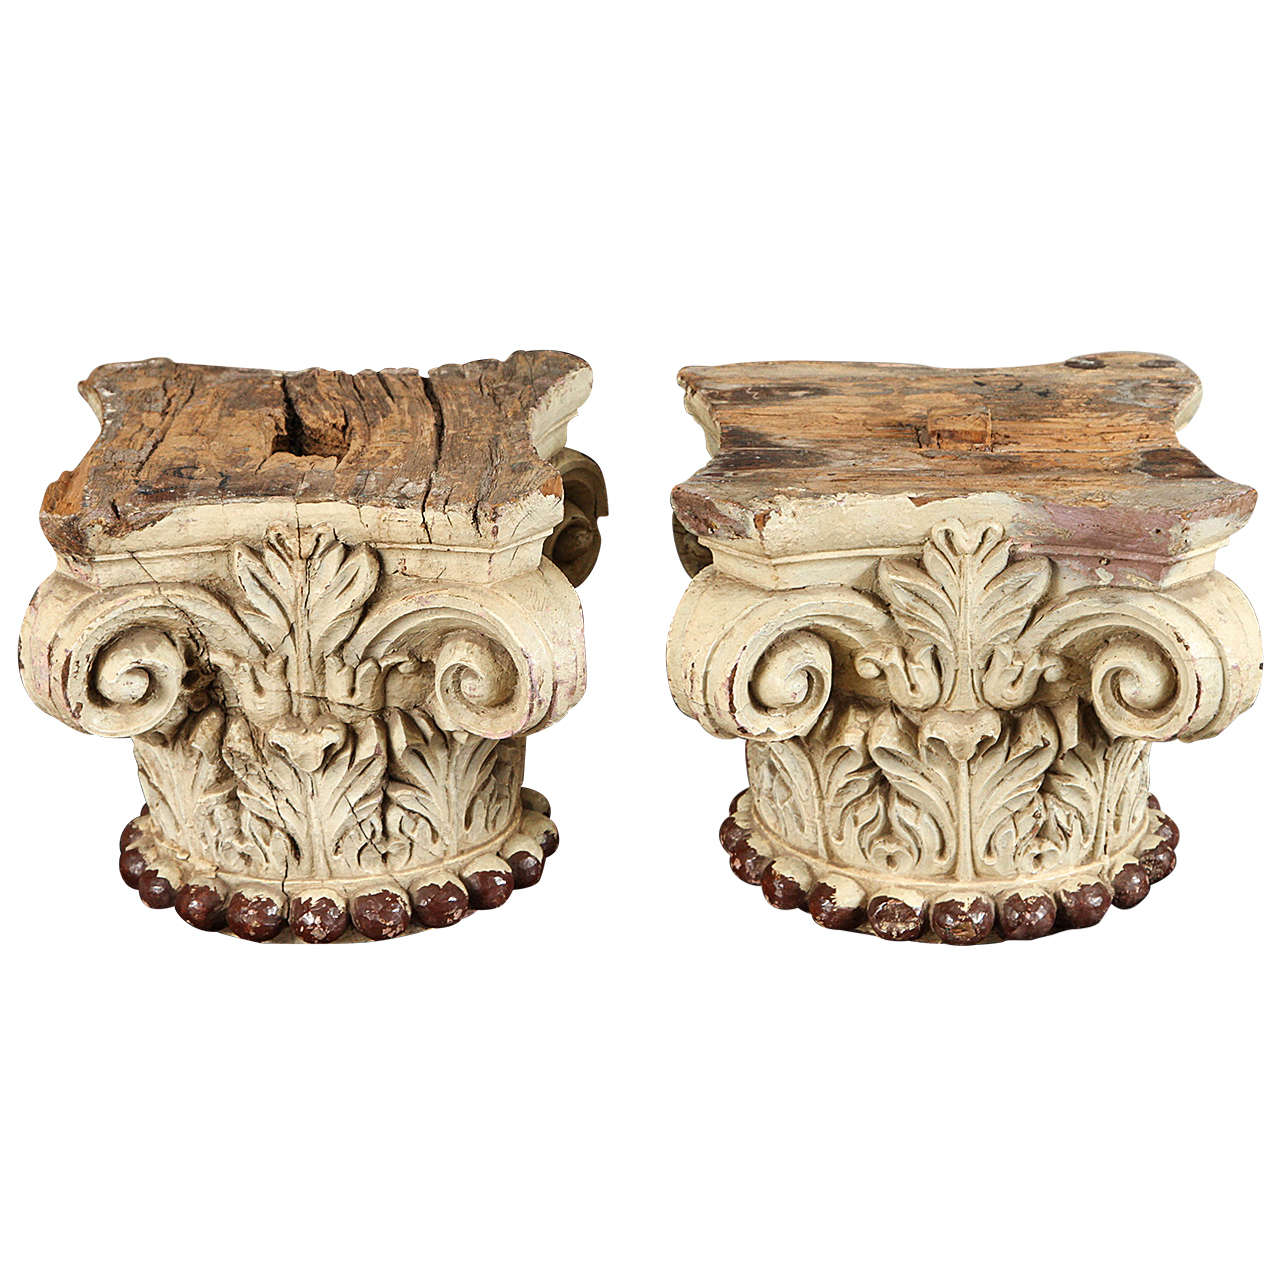 Pair of Ivory Painted Capitals from 19th Century Italy